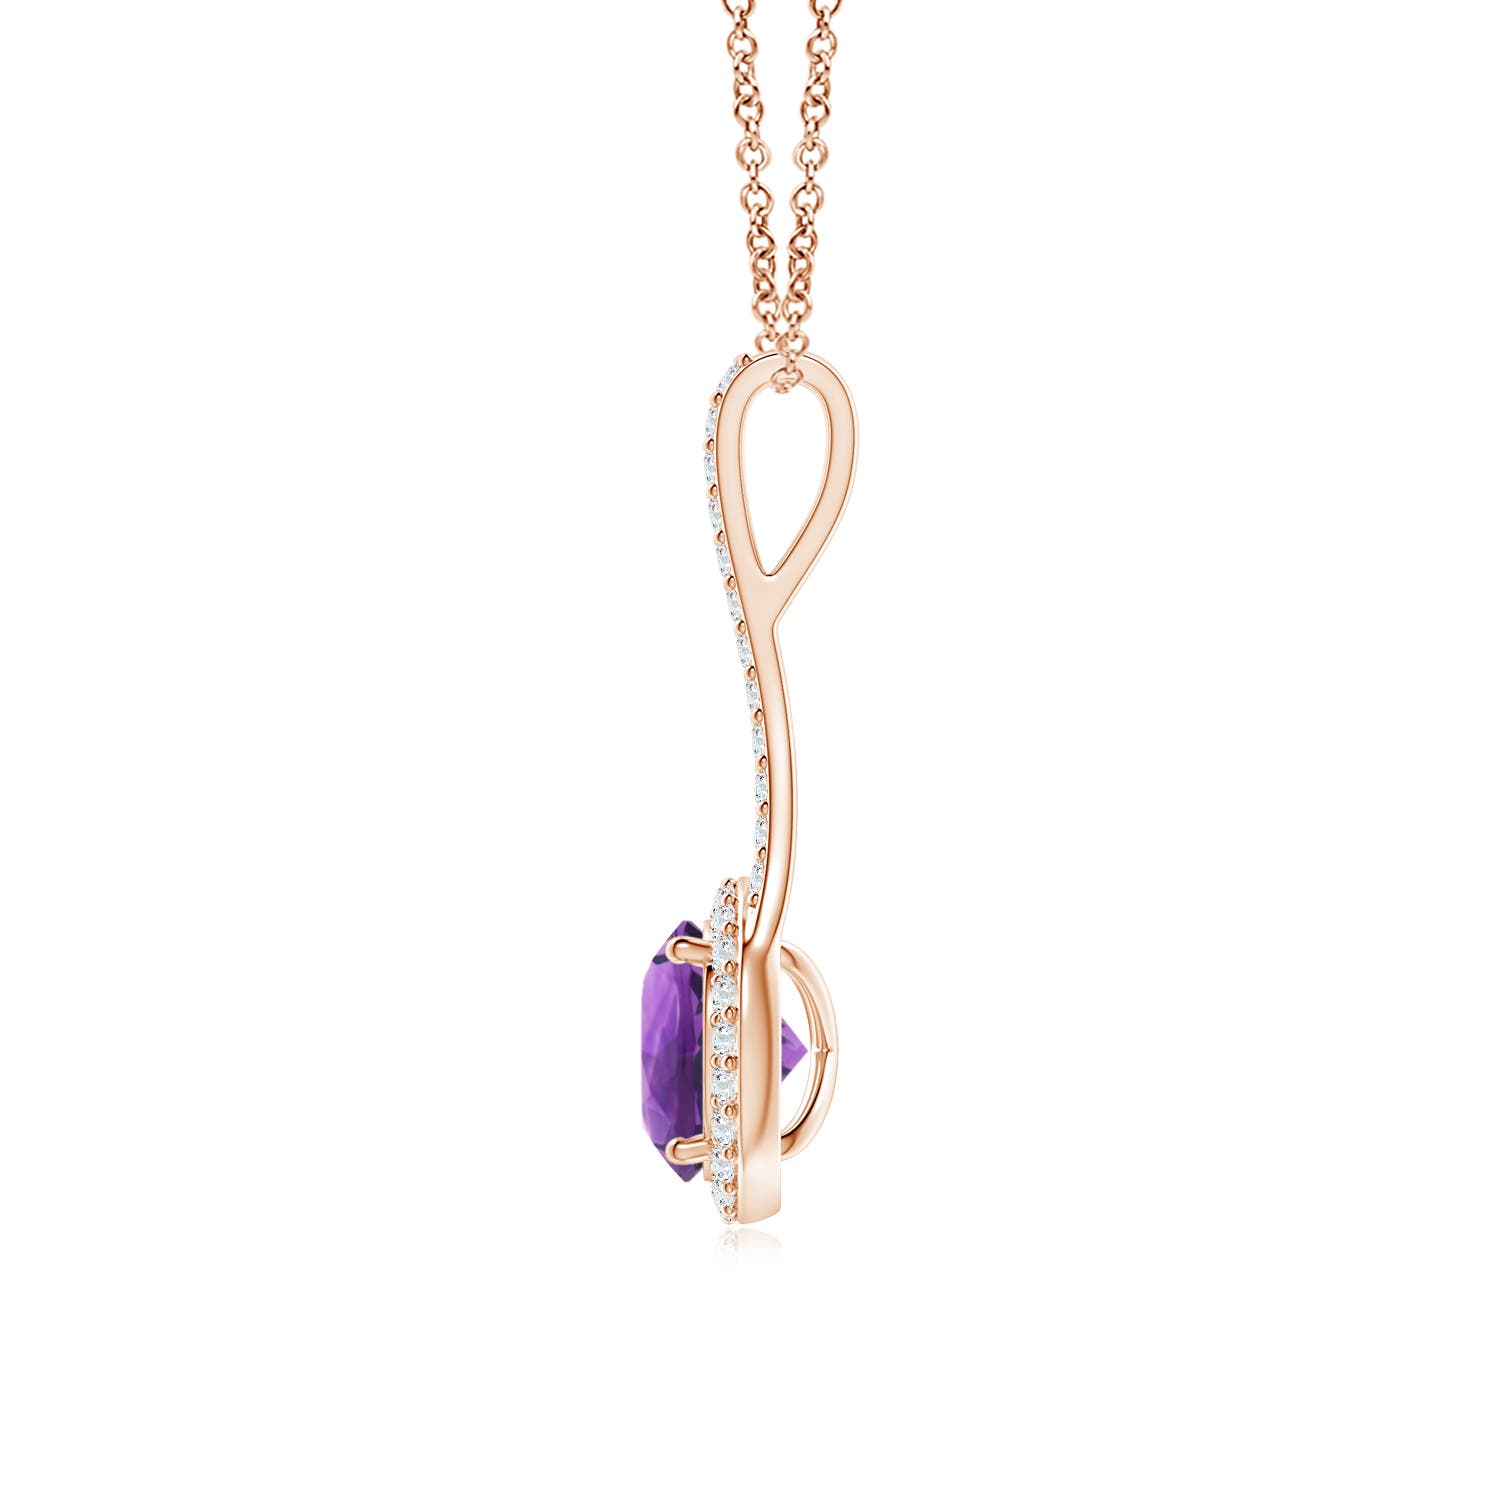 AAA - Amethyst / 1.42 CT / 14 KT Rose Gold